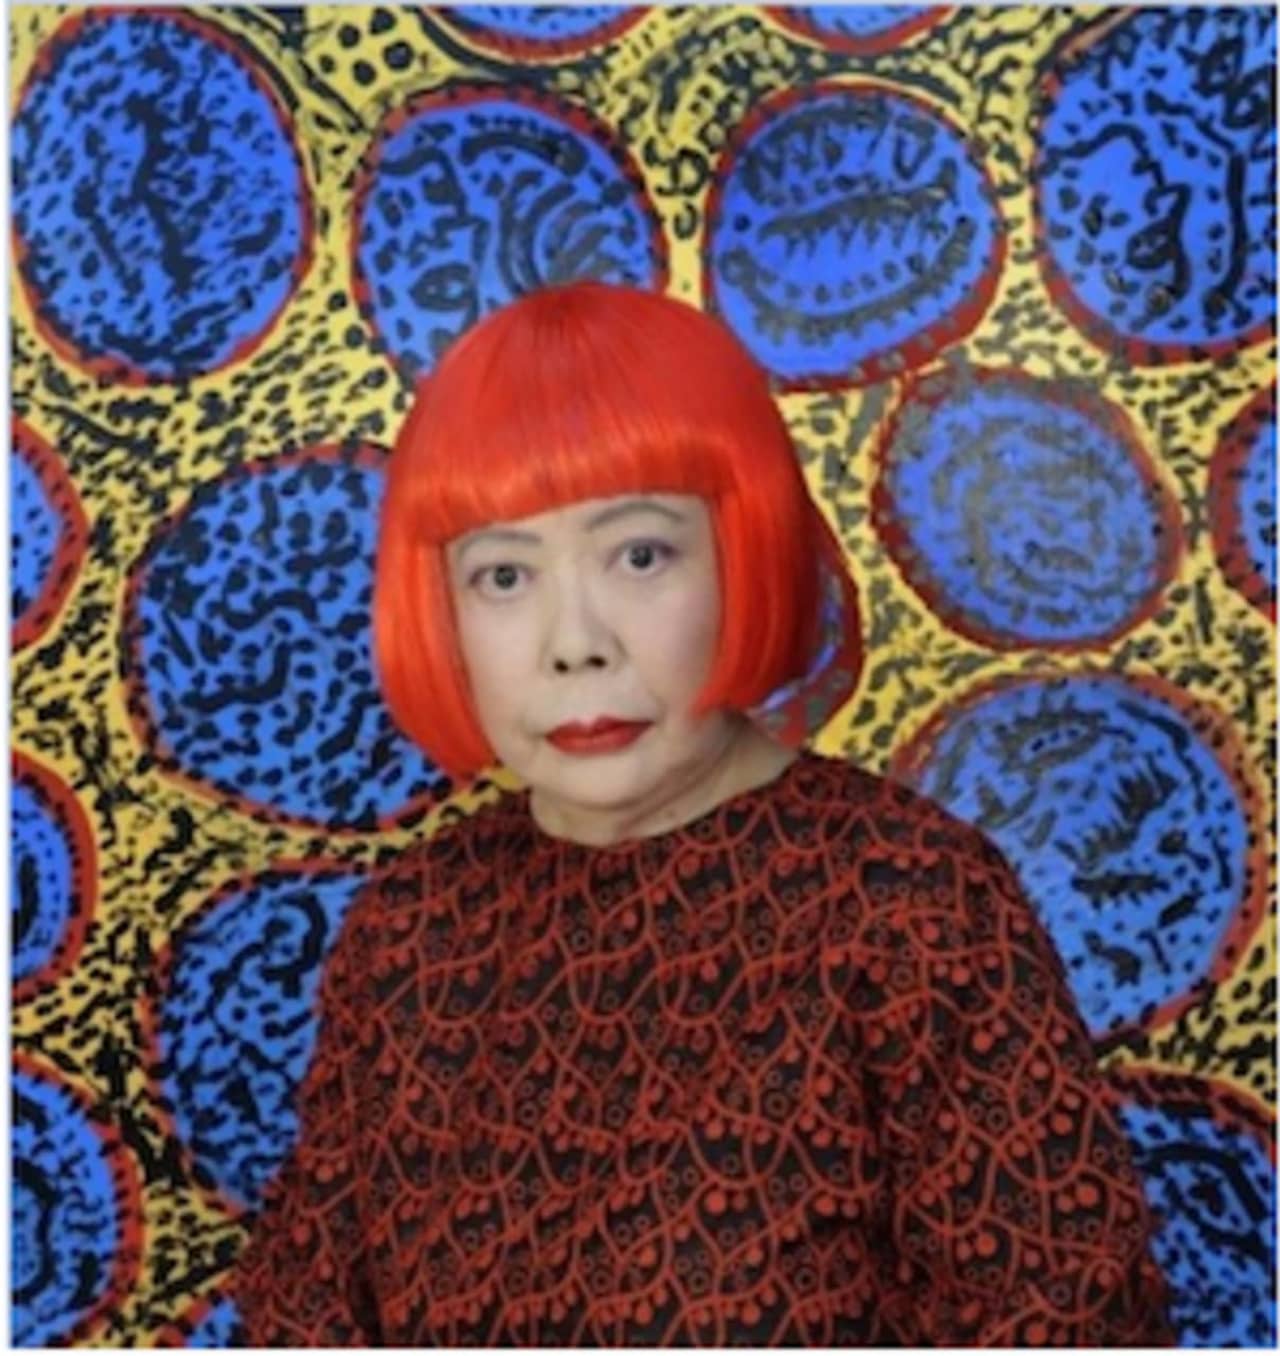 Yayoi Kusama's Narcissus Garden will be on display at the Glass House this season, beginning in May.